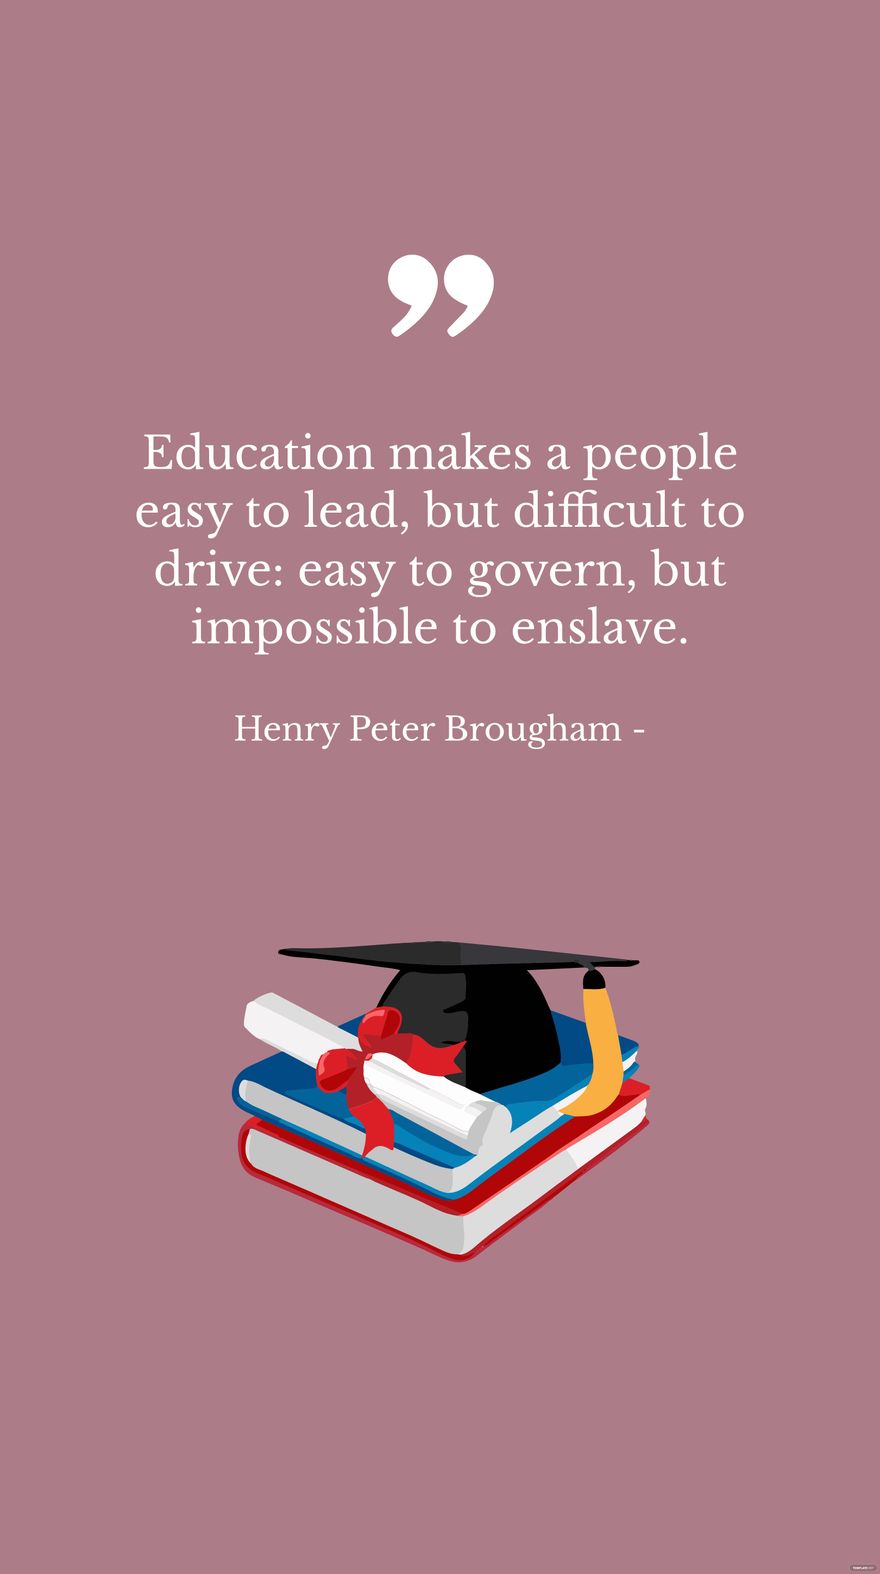 Henry Peter Brougham - Education makes a people easy to lead, but difficult to drive: easy to govern, but impossible to enslave. in JPG